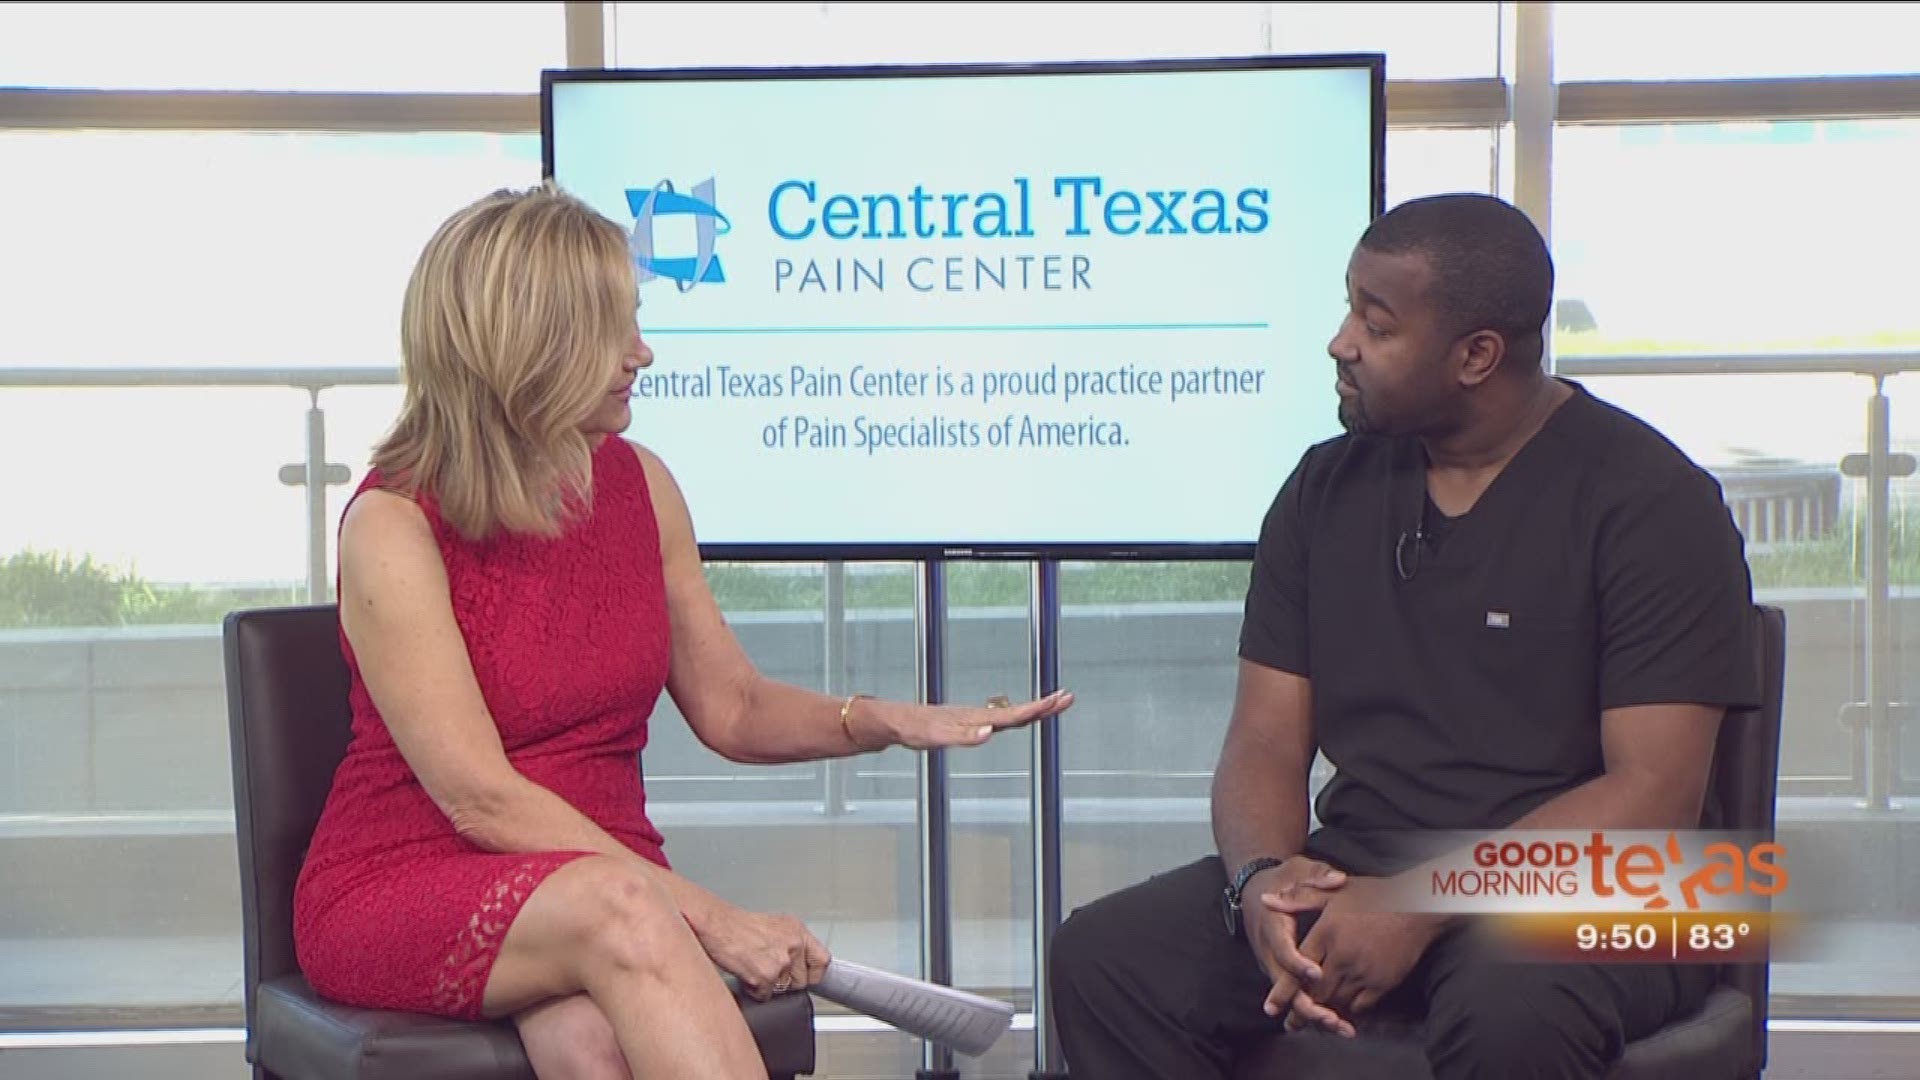 Relieve pain with help from Central Texas Pain Center